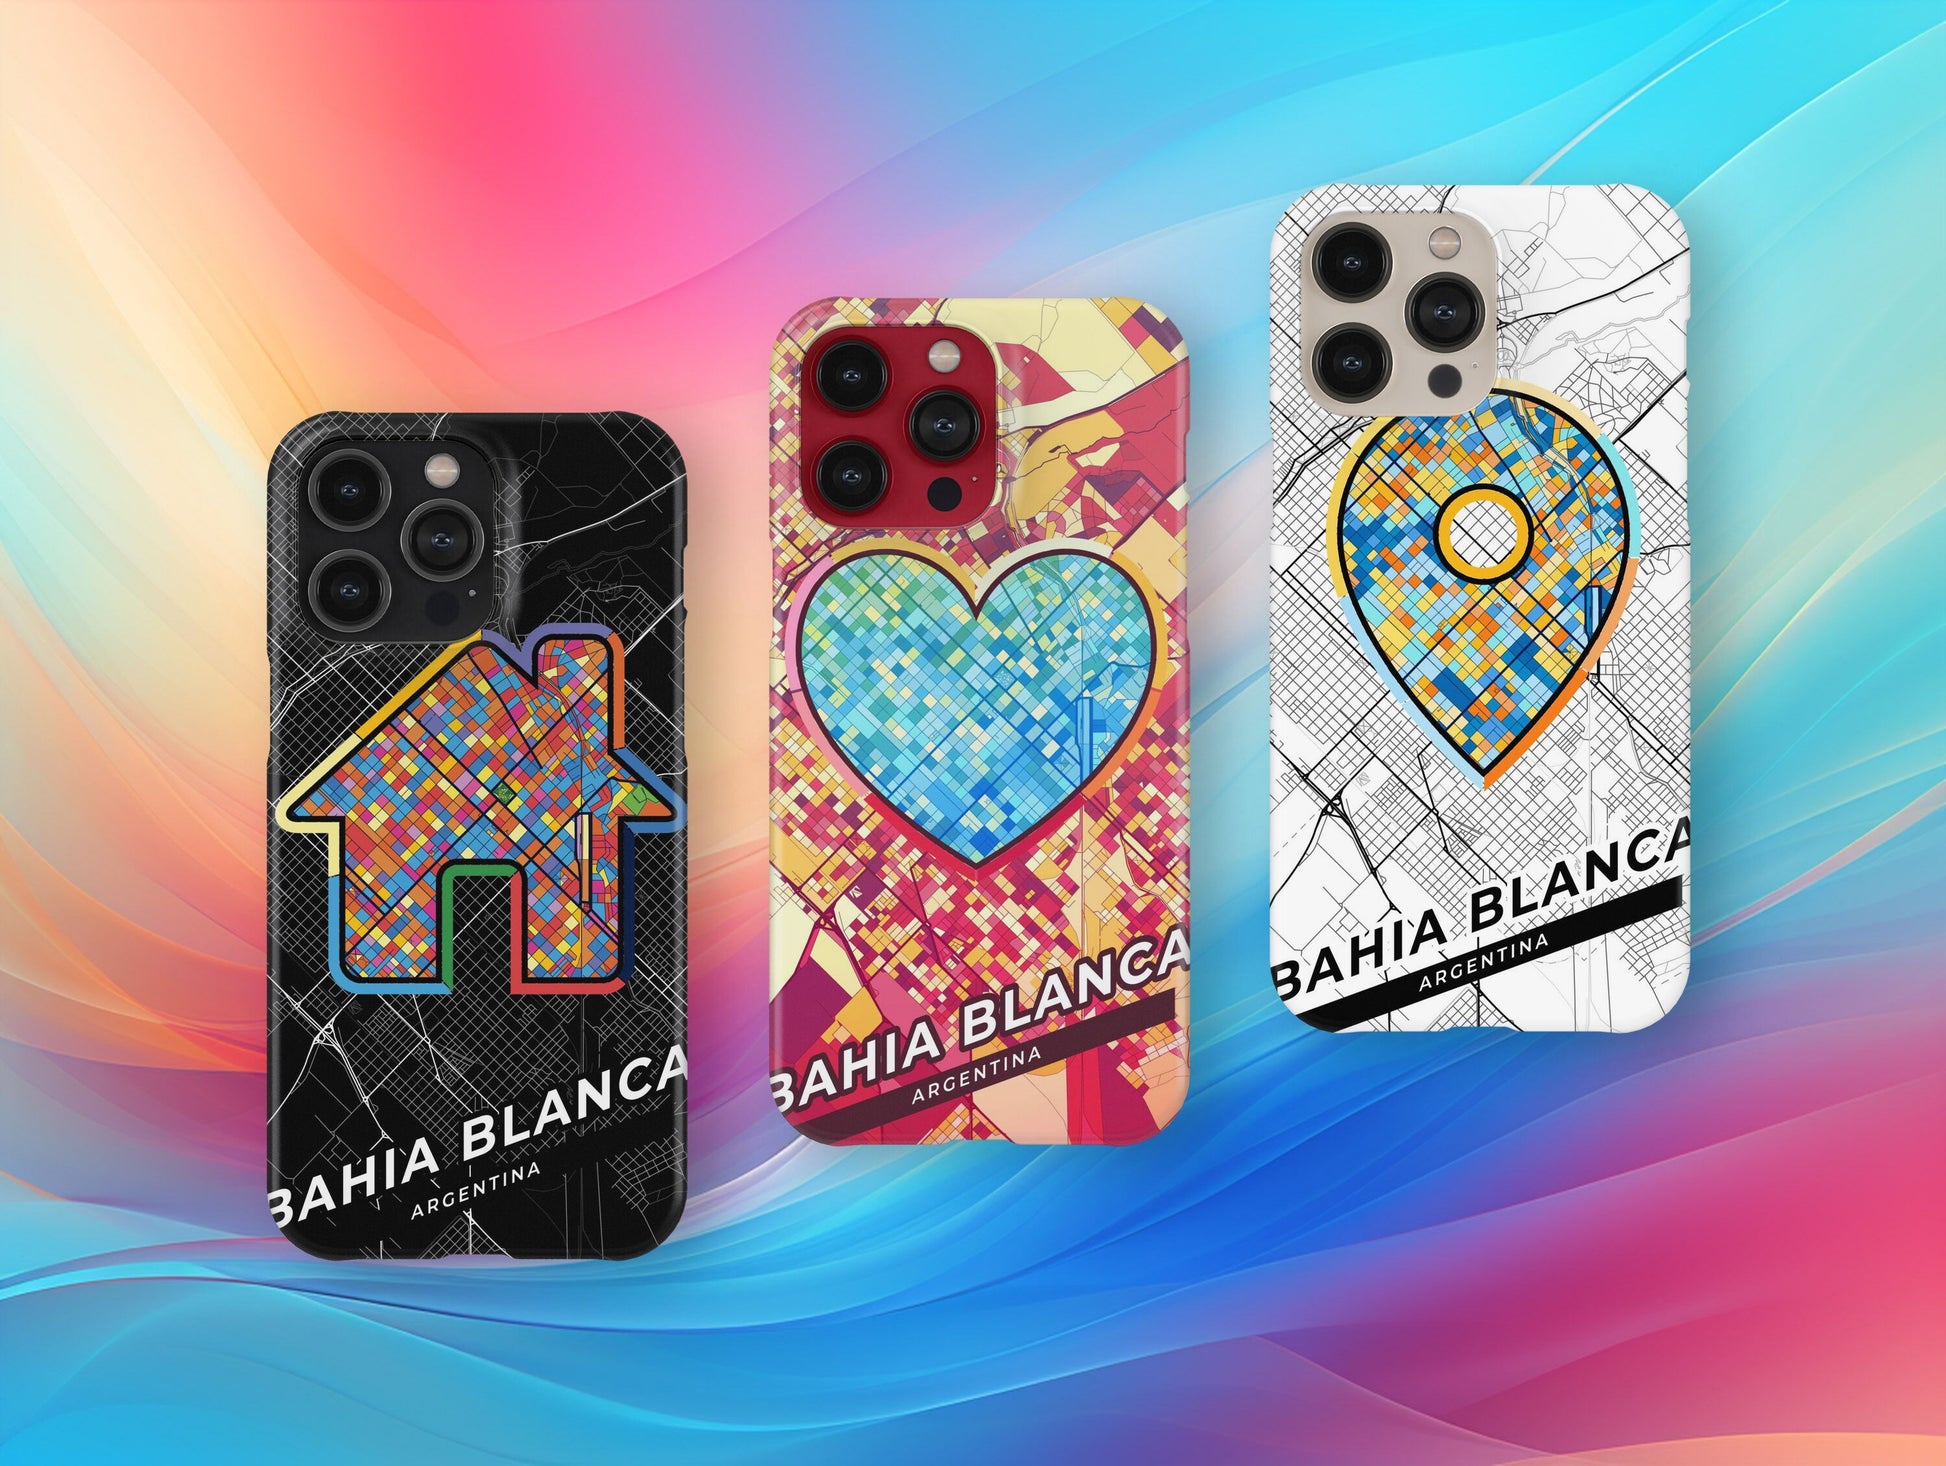 Bahia Blanca Argentina slim phone case with colorful icon. Birthday, wedding or housewarming gift. Couple match cases.